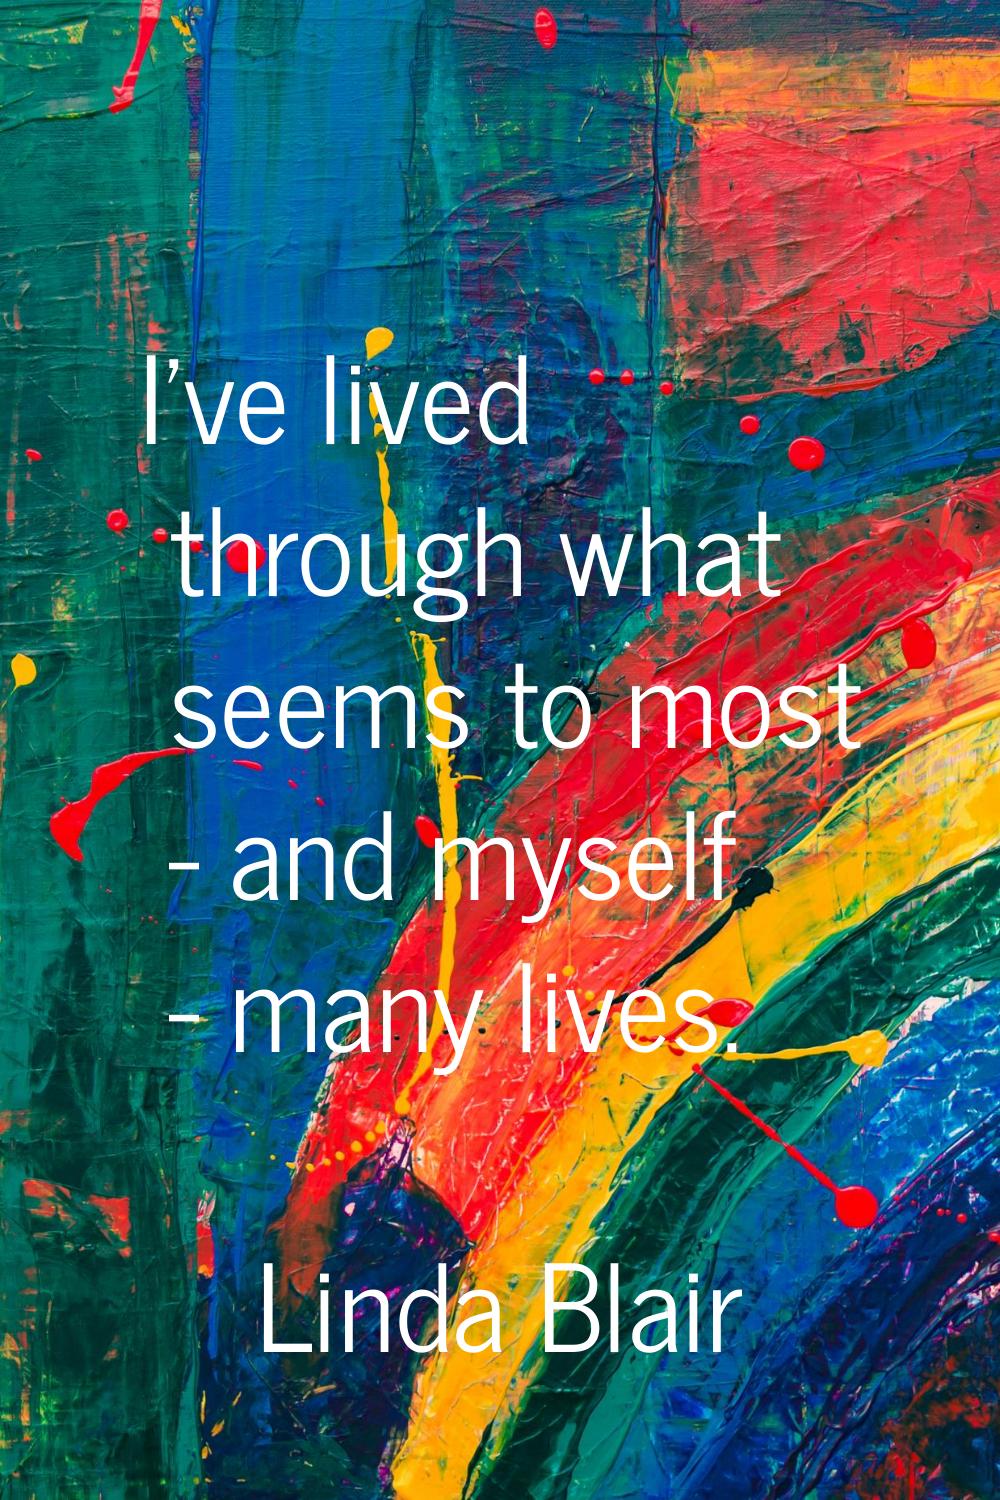 I've lived through what seems to most - and myself - many lives.